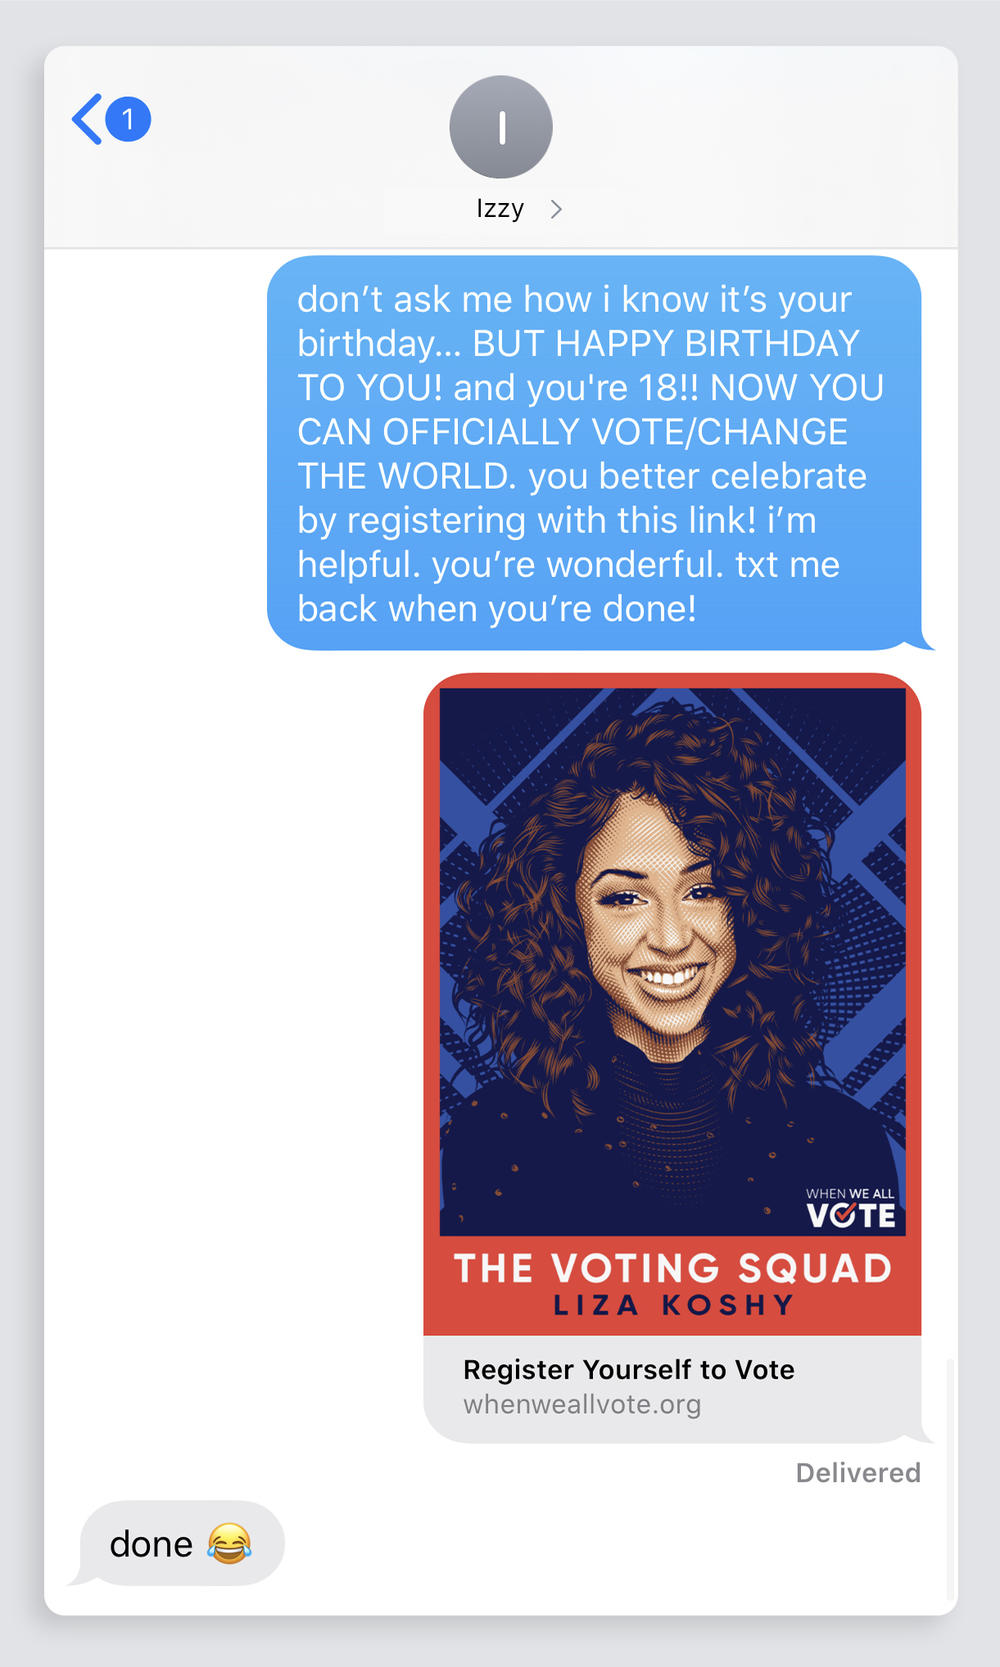 As an outreach effort, When We All Vote teamed up with a text messaging platform to remind young voters to register.